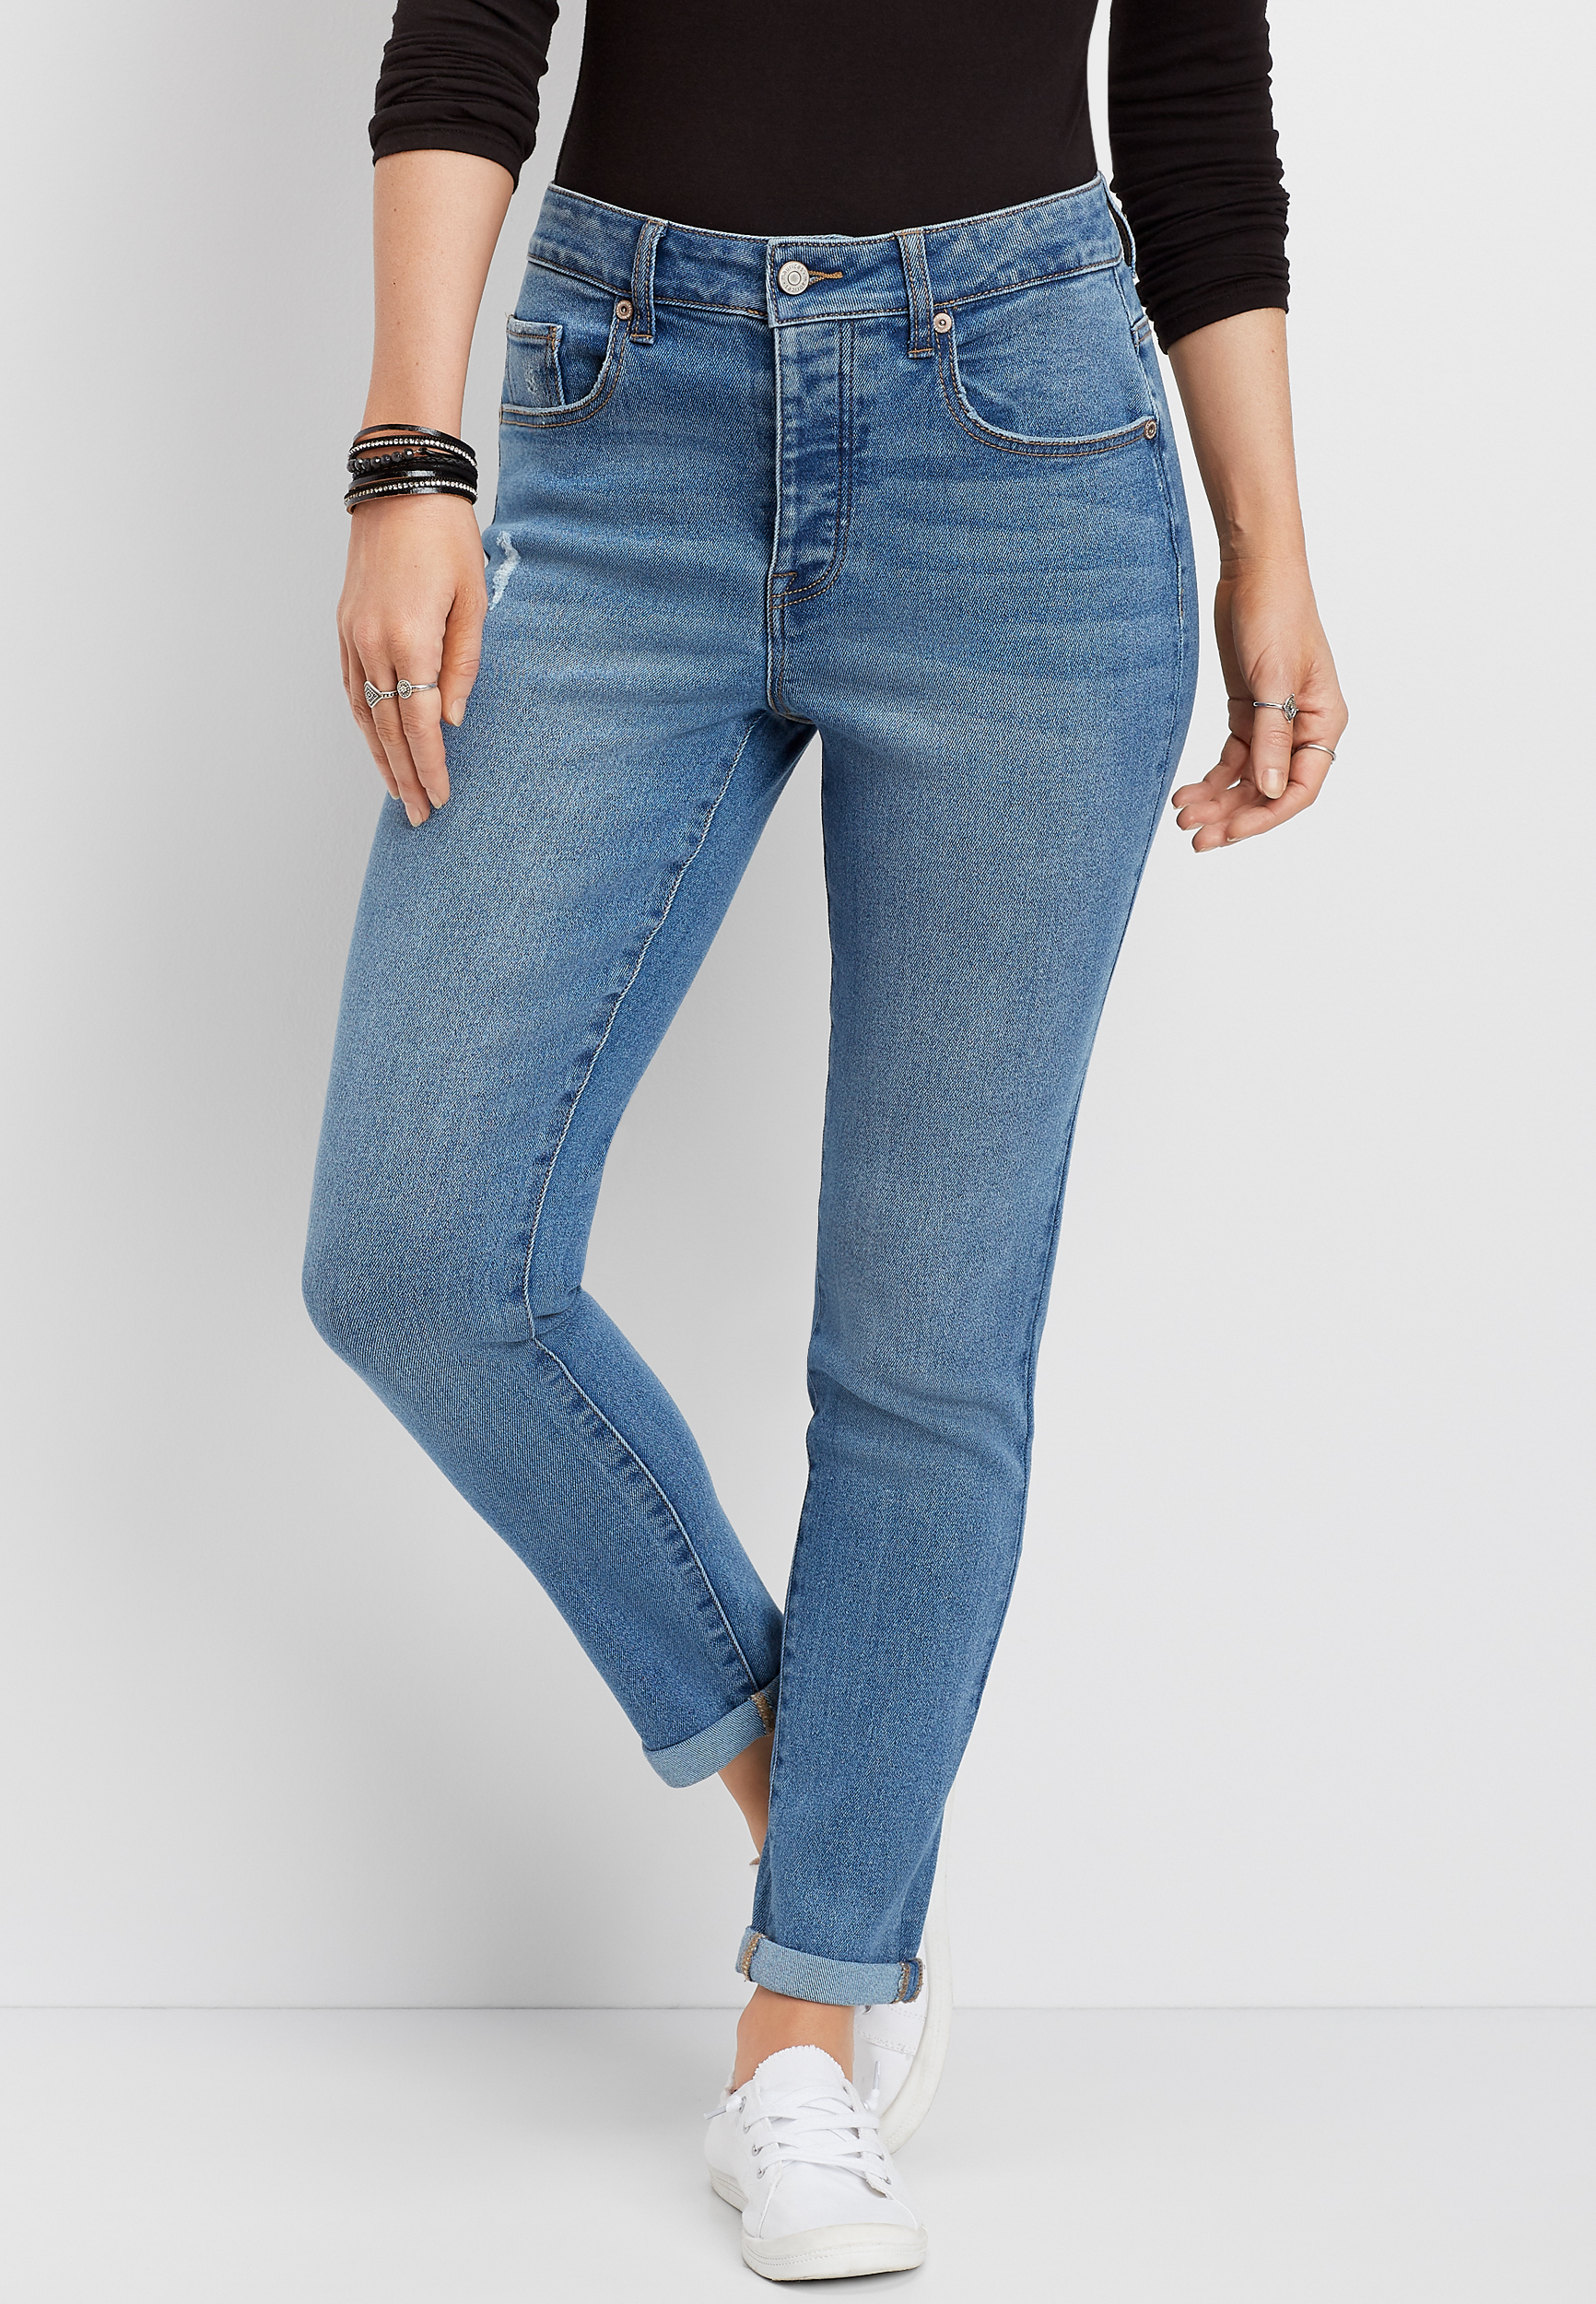 Vintage High Rise Light Wash Girlfriend Jean | maurices